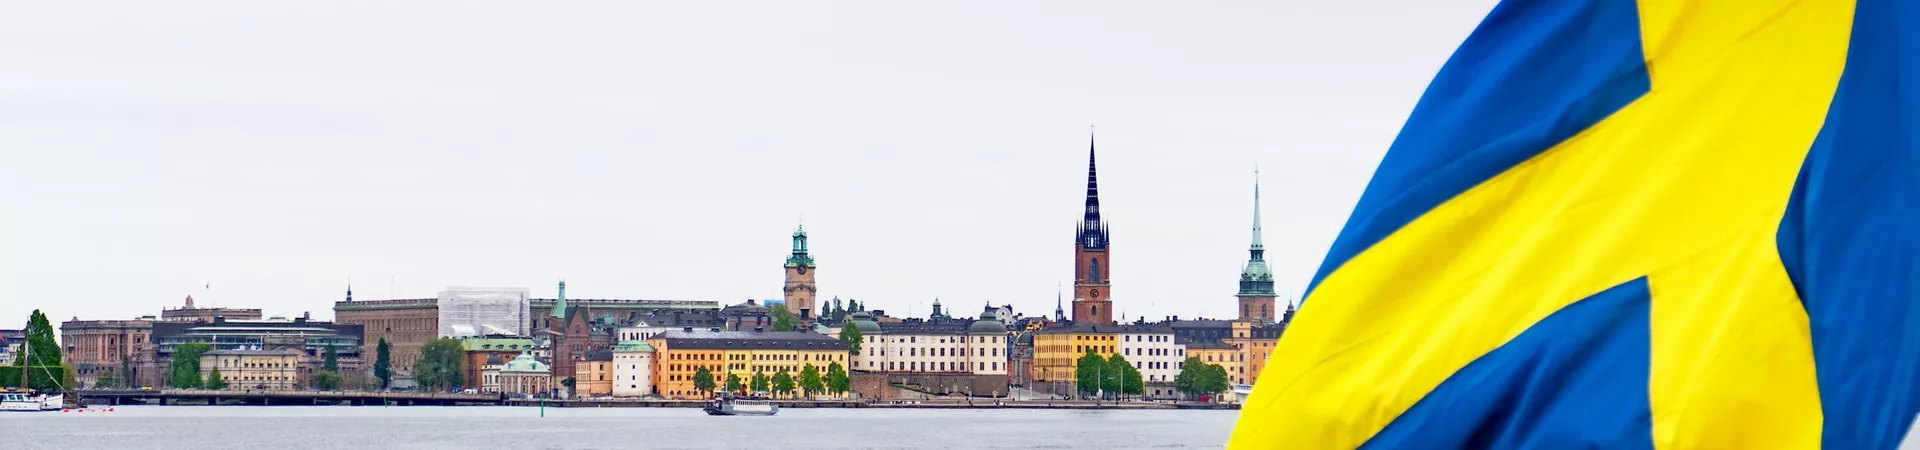 Skyline Of The City Of Stockholm